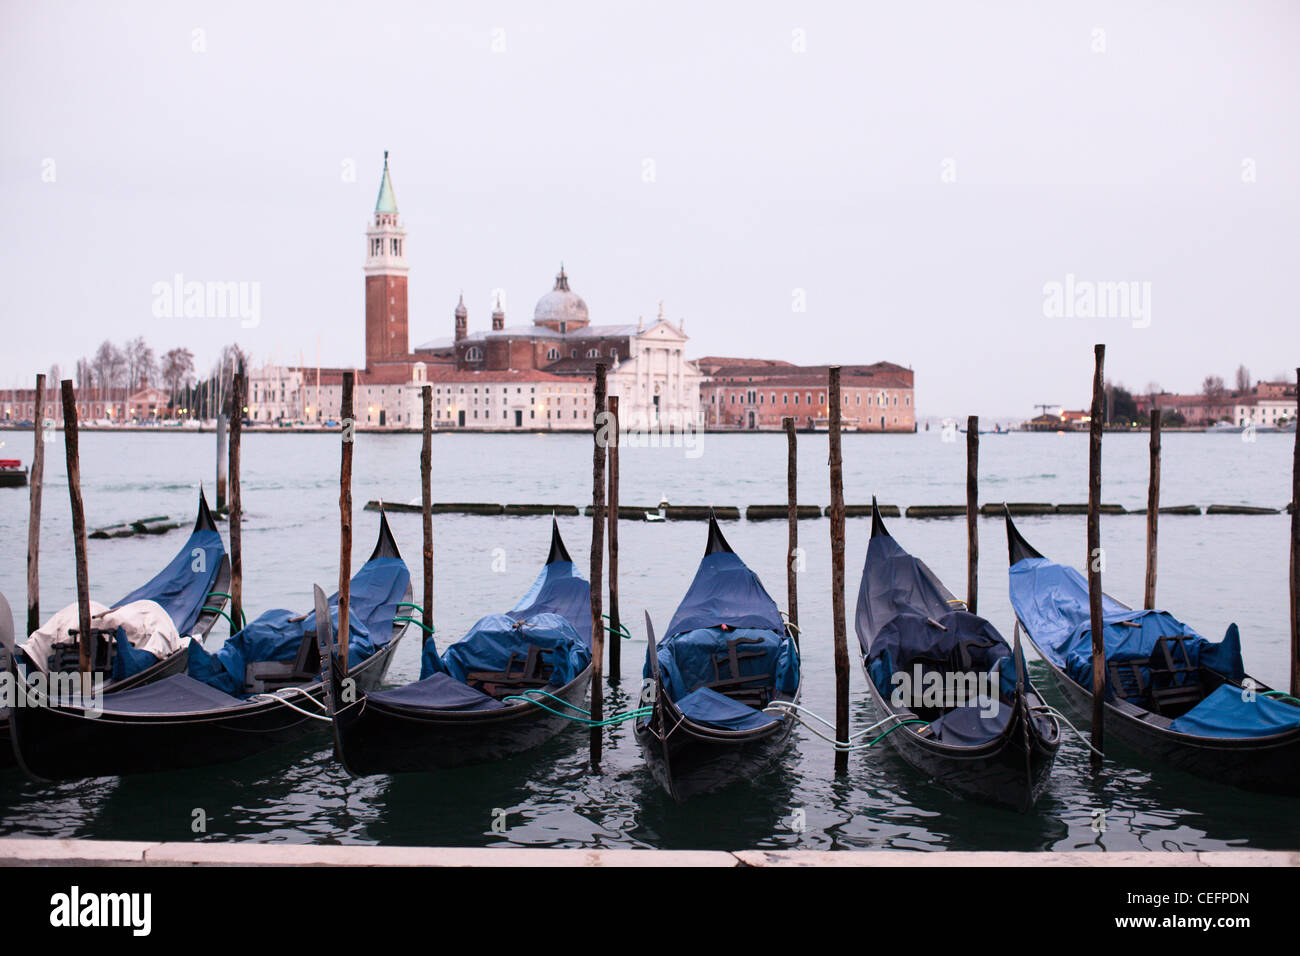 Gondolas moored up with the church of San Marco Maggiore in the distance. Venice, Italy. Stock Photo